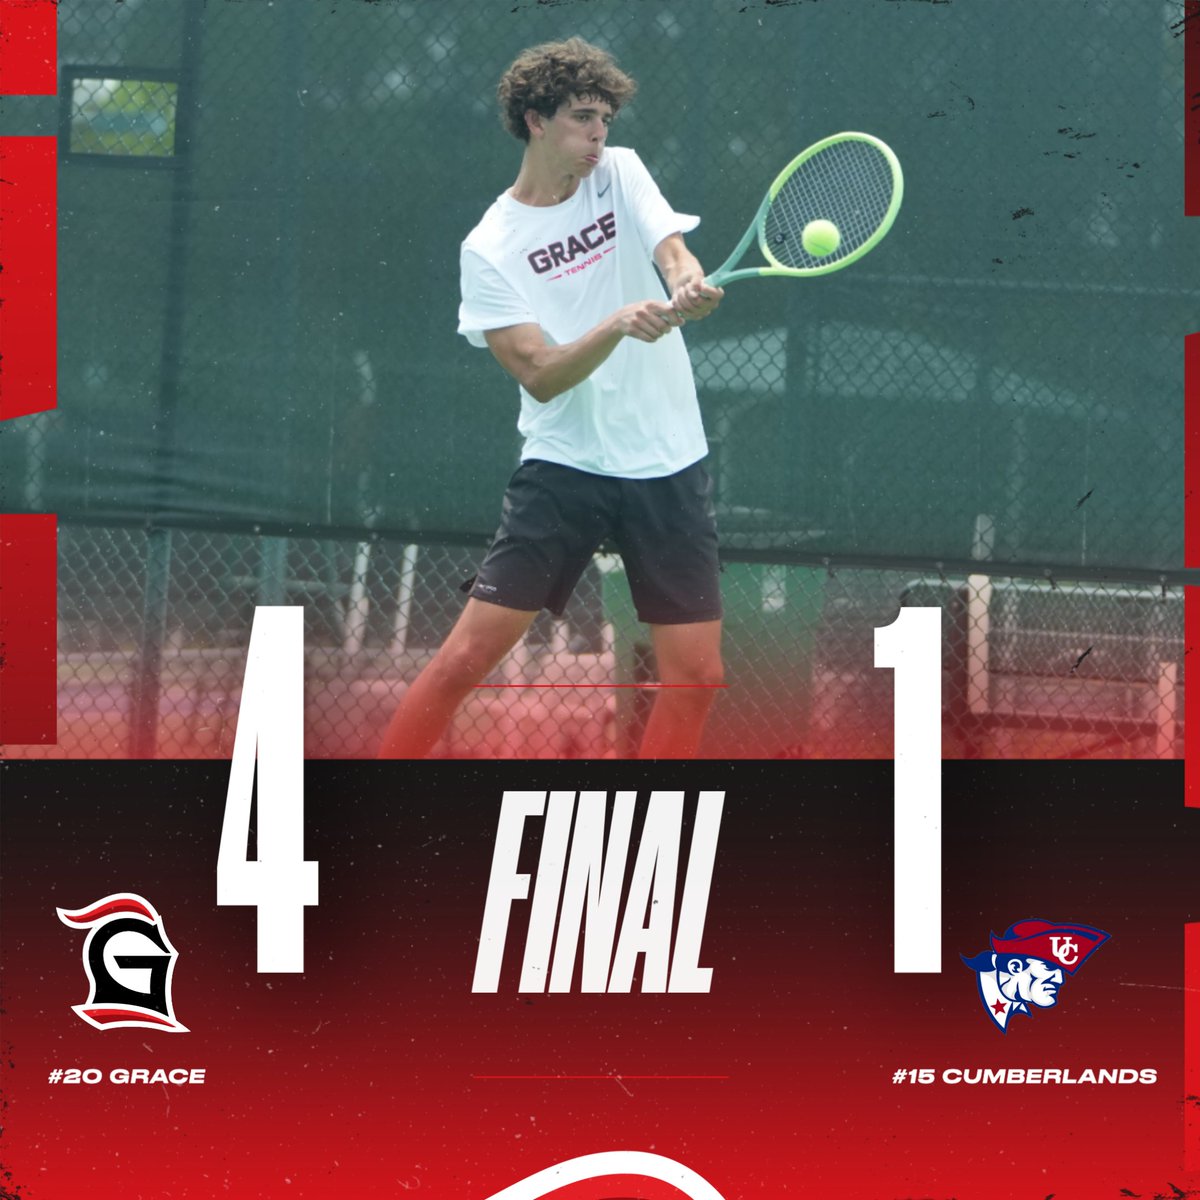 🚨 UPSET COMPLETE! 💪 Grace Men's Tennis kicks off play at the NAIA National Championships with a 4-1 upset of No. 15 Cumberlands! 🎾 Lancers will battle with No. 3 Keiser in the morning in the NAIA Second Round. #LancerUp #NAIATennis